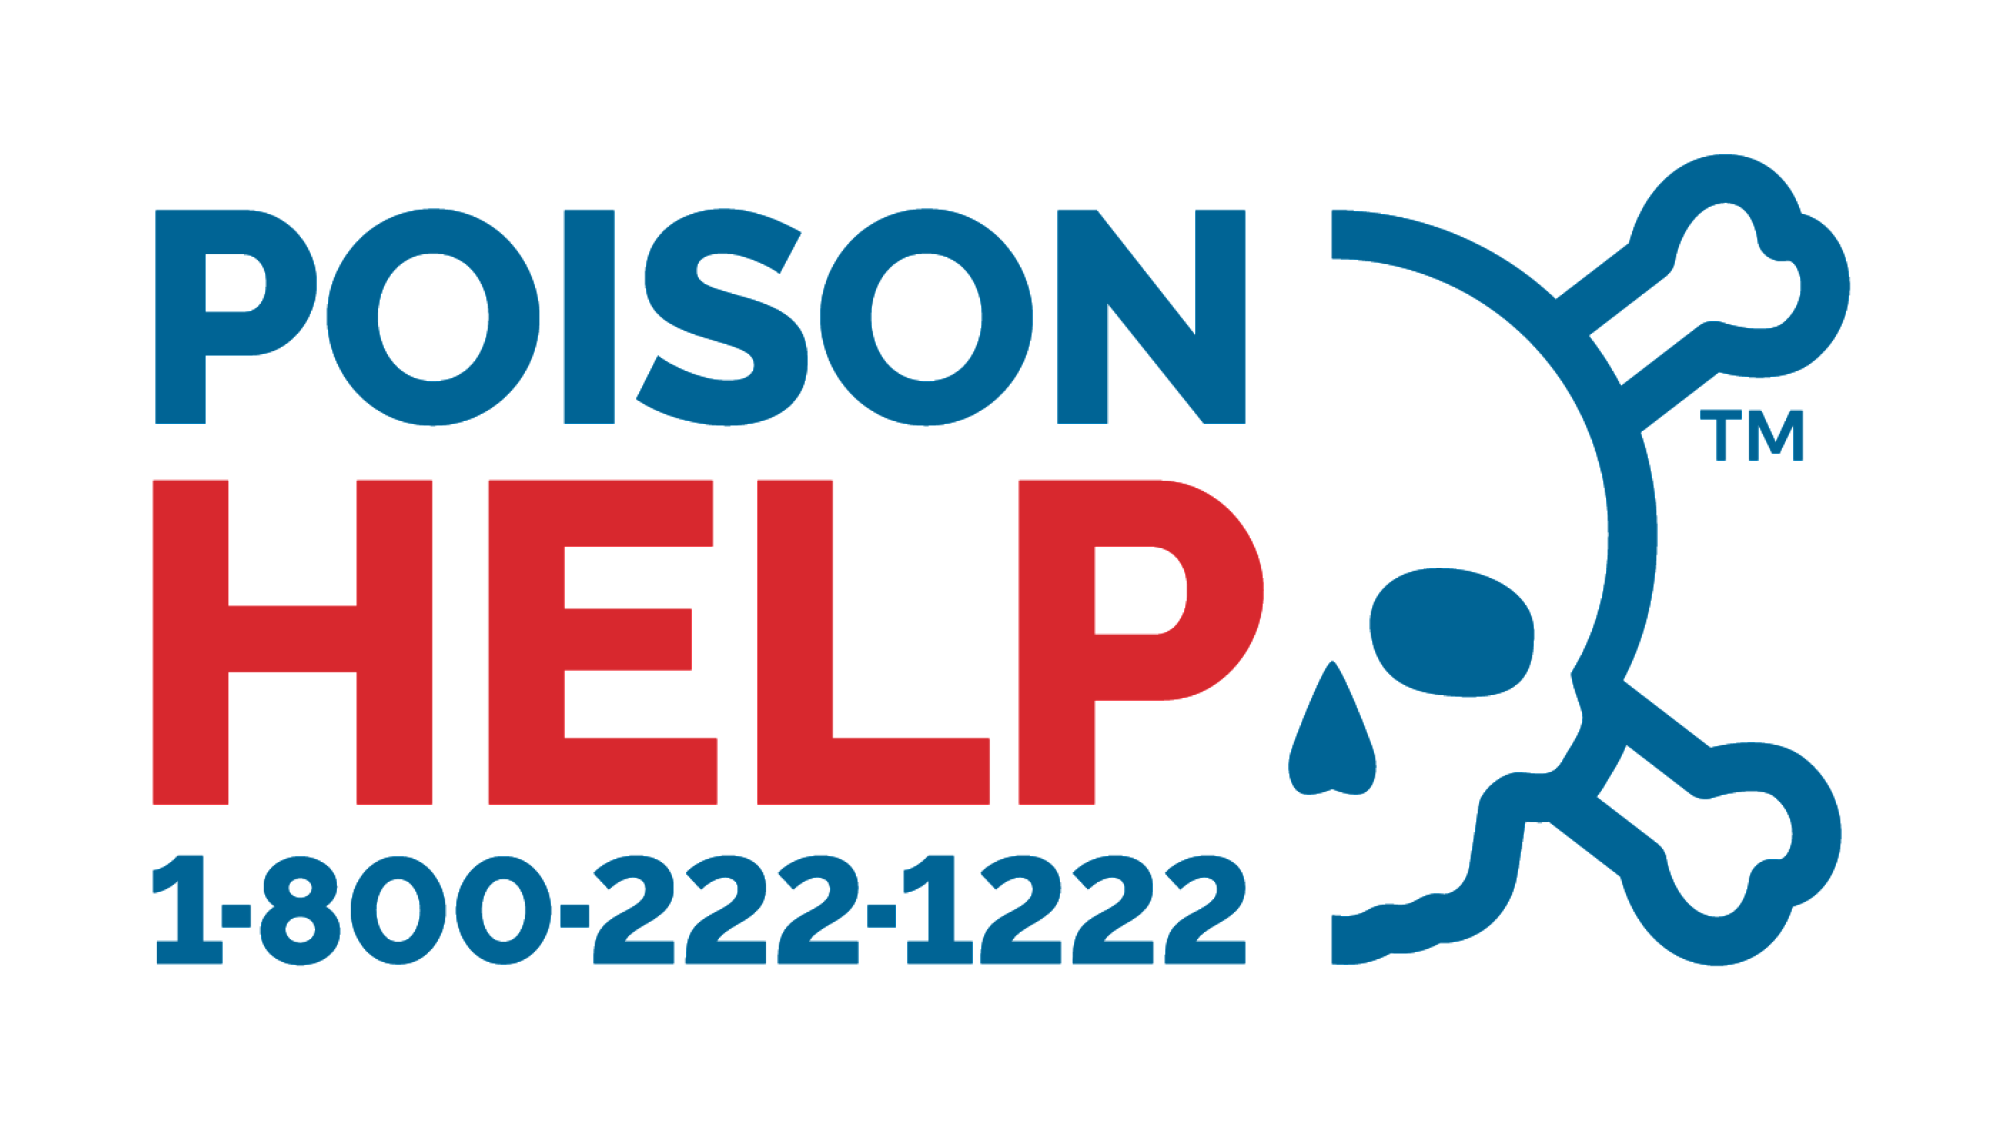 Help Logo with phone number 1-800-222-1222